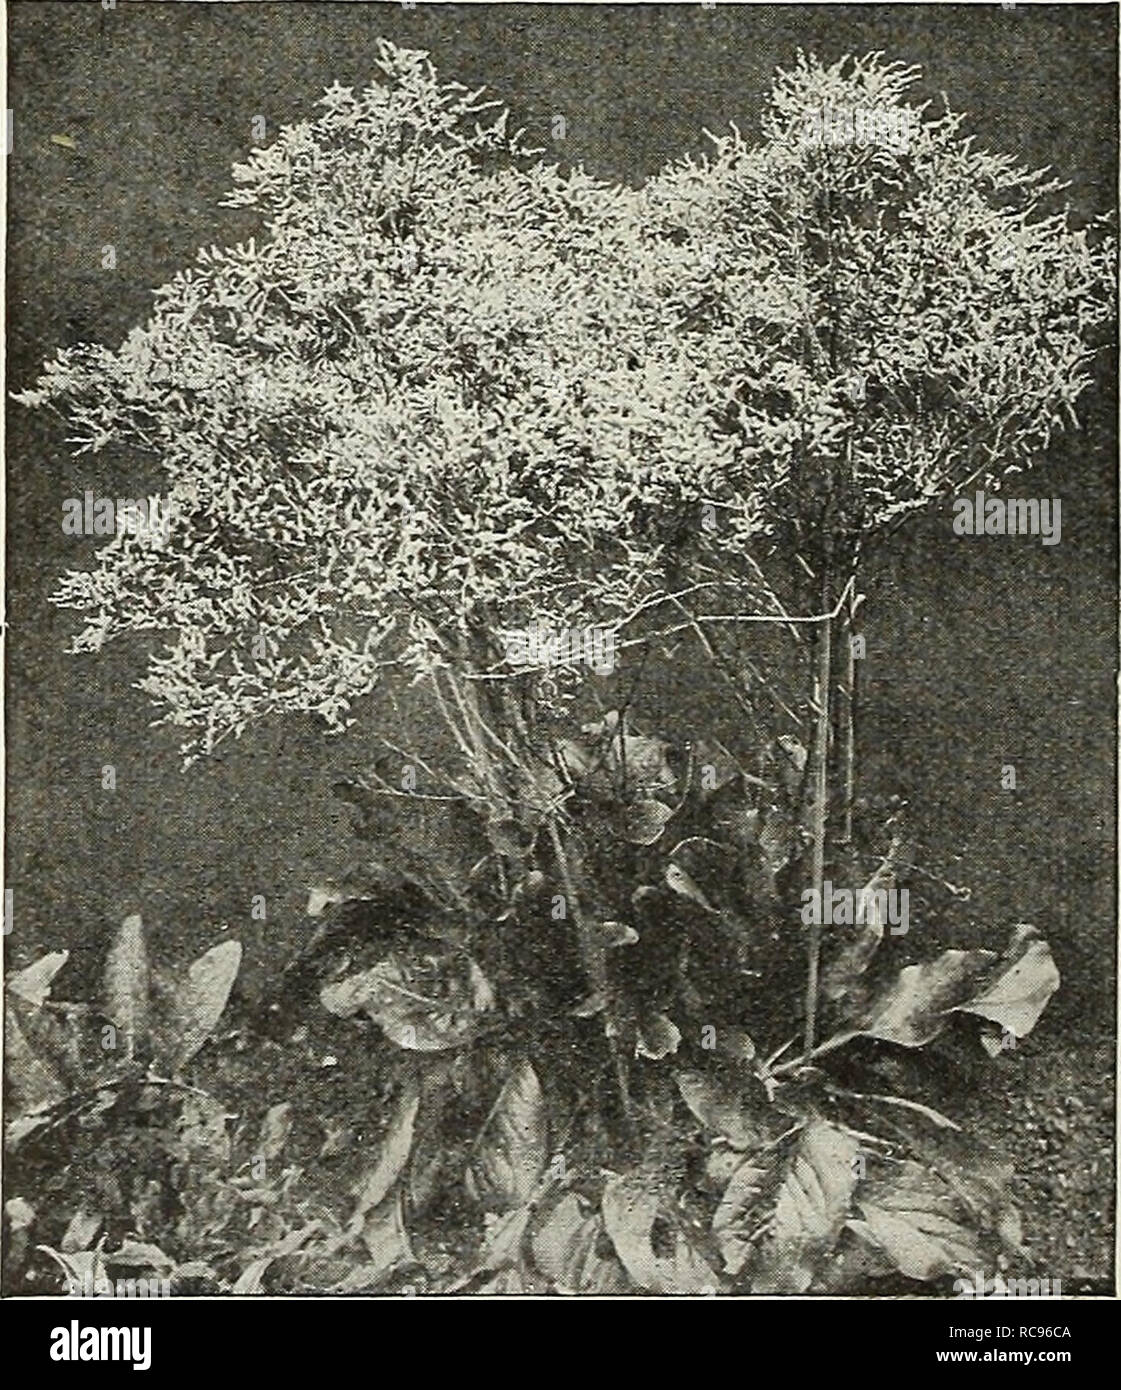 . Dreer's garden book 1926. Seeds Catalogs; Nursery stock Catalogs; Gardening Equipment and supplies Catalogs; Flowers Seeds Catalogs; Vegetables Seeds Catalogs; Fruit Seeds Catalogs. Spiraea Silphium (Cup-Plant) Perfoliatum. A stately perennial, also known as the Compass Plant, on account of the leaves bemg arranged at right angles to the stem; grows 5 to 7 feet high, with large single yellow sun- flower-like blooms from July to September. 30 cts. each; $2.50 per doz. SolidagO (Golden Rod) The varieties offered below are the most desirable of our native Golden Rods. Altissima. The giant of th Stock Photo